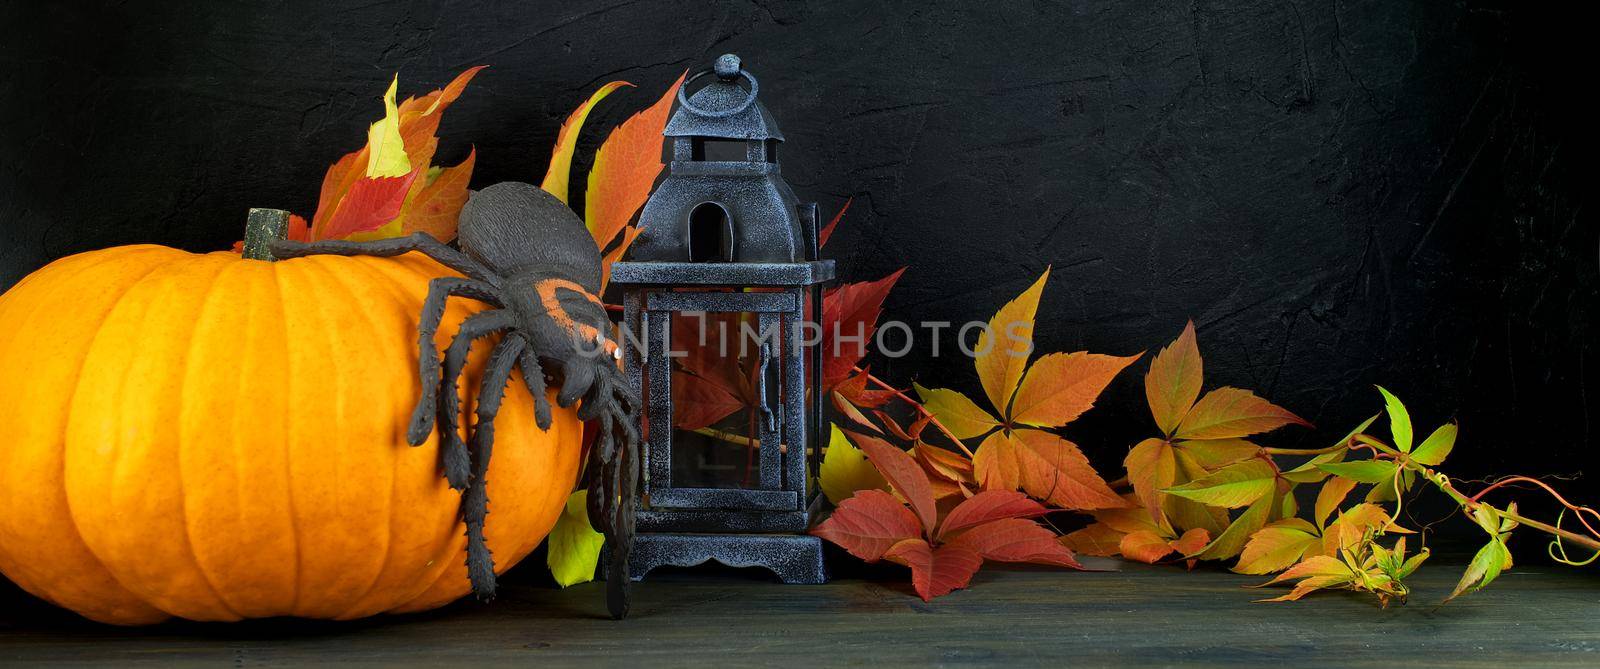 Halloween panorama with creepy spider on pumpkin and fall leaves by NetPix